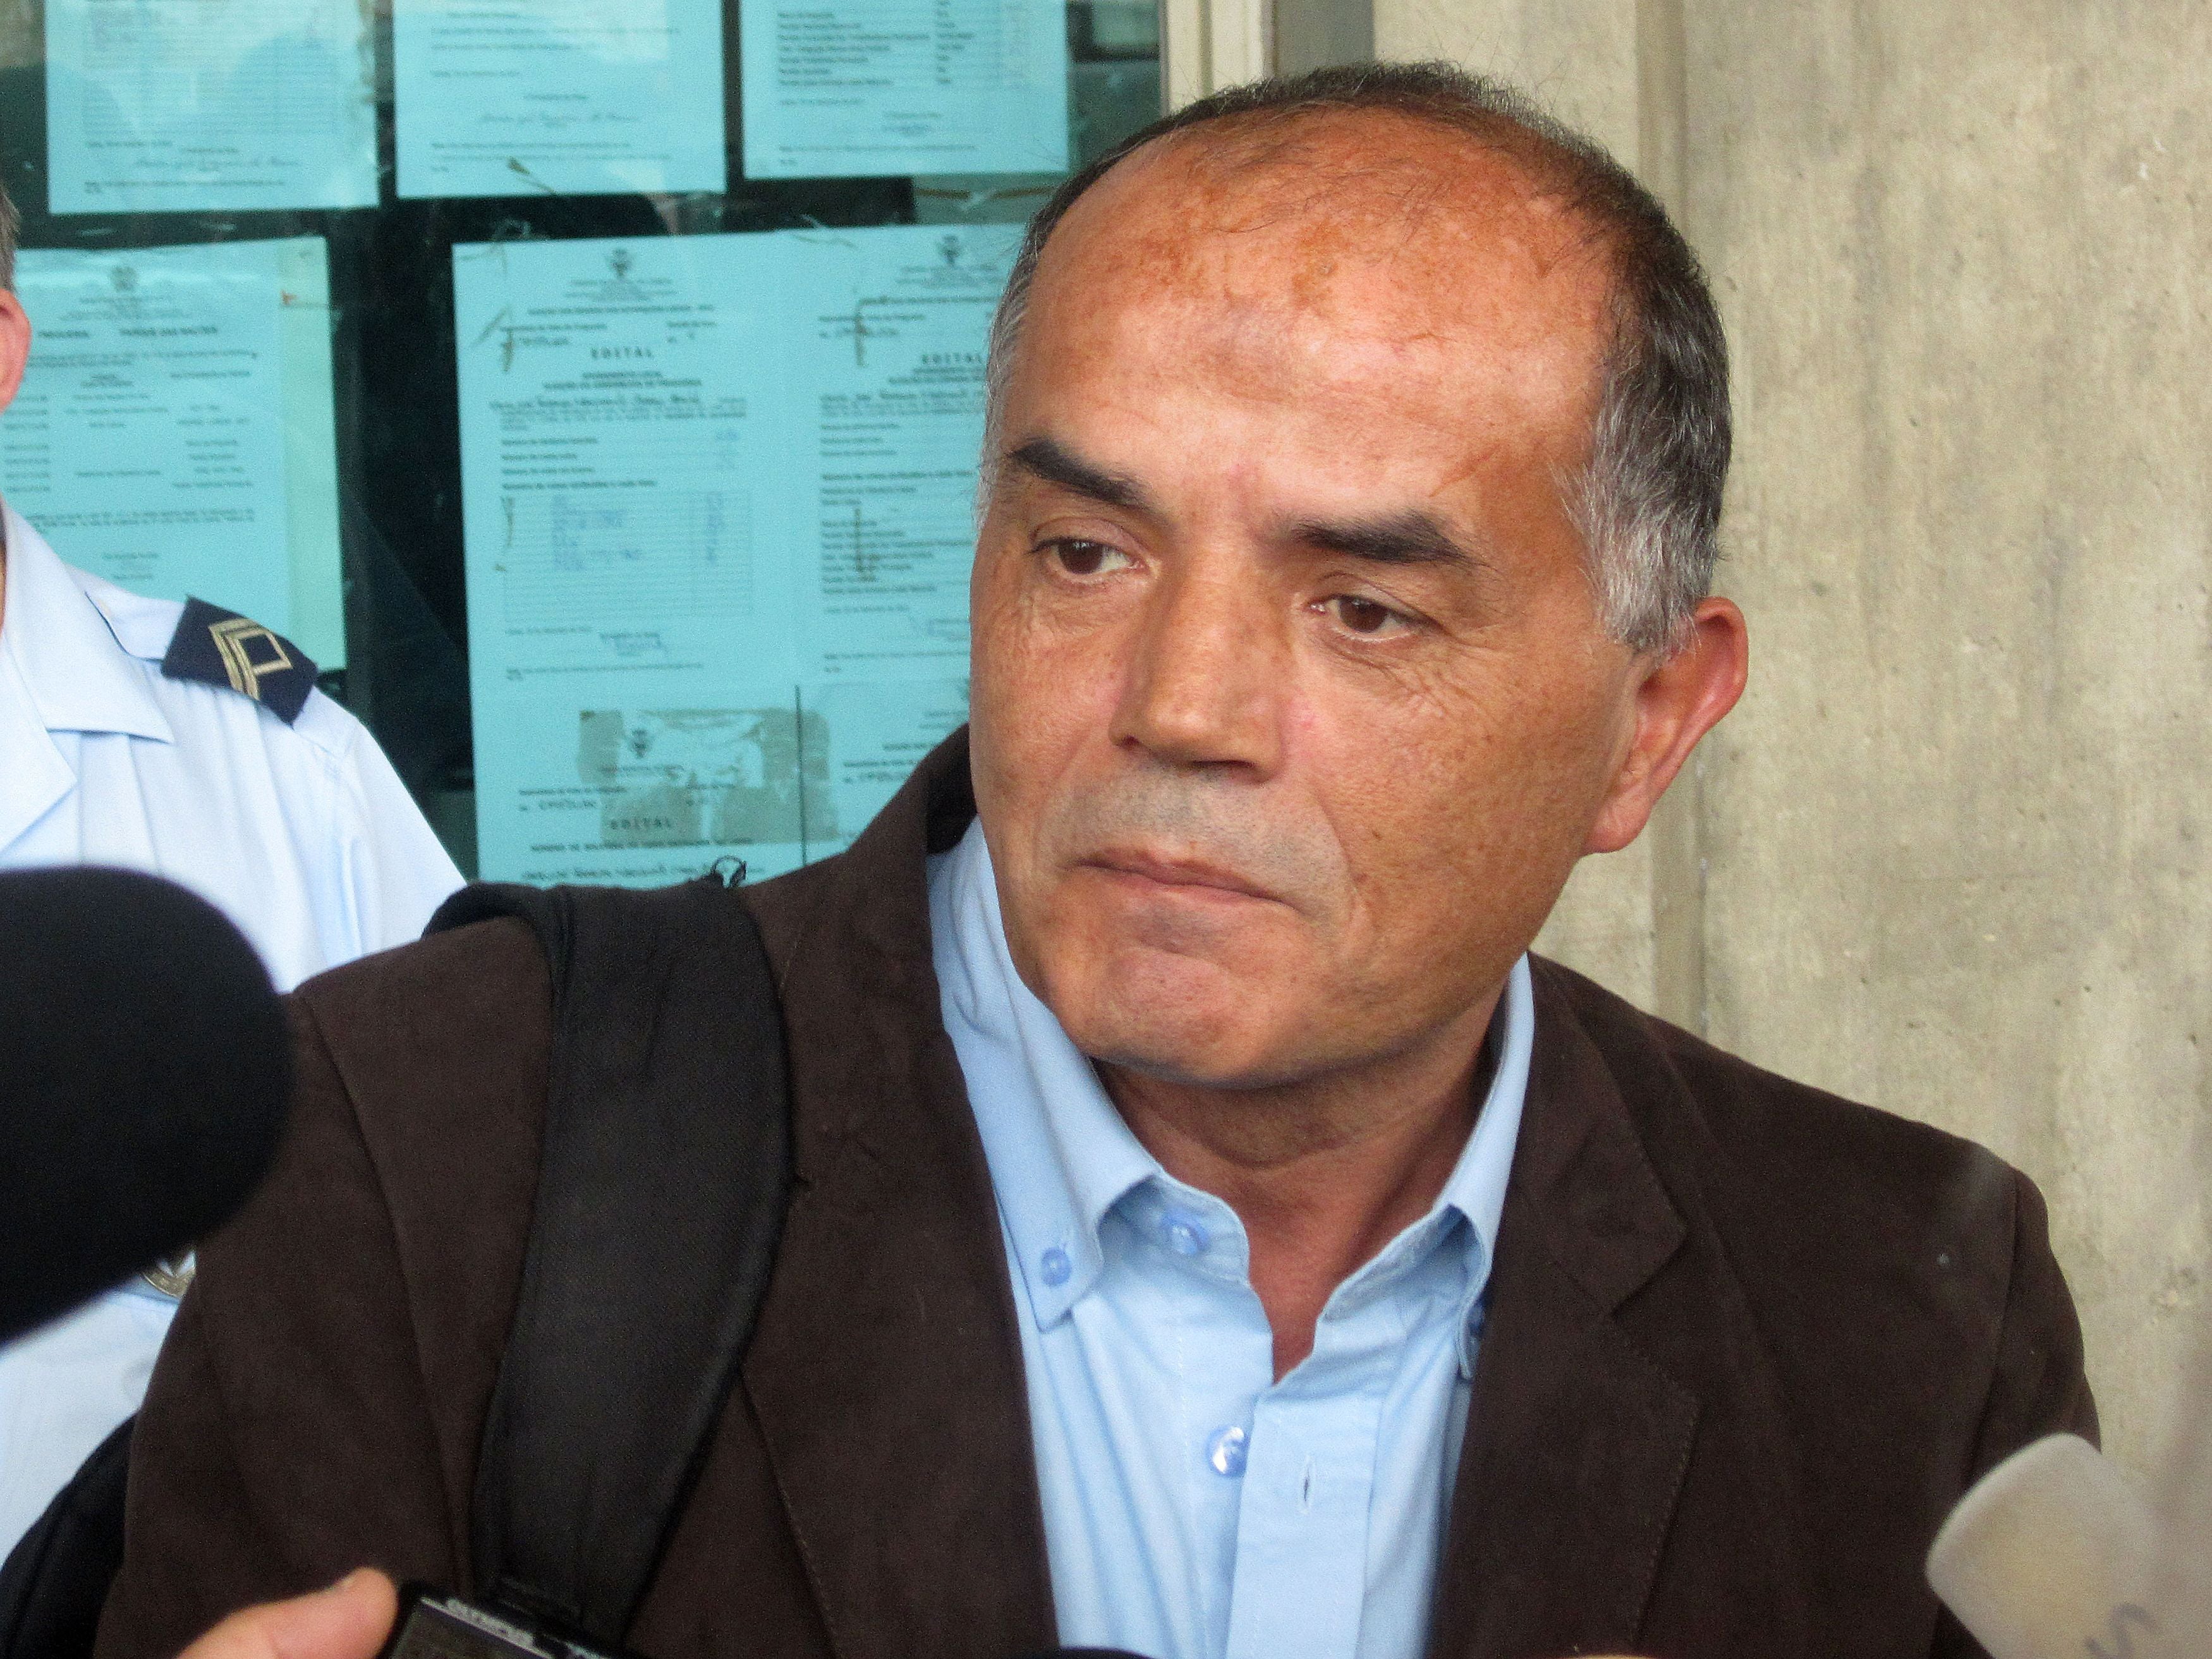 Goncalo Amaral made claims about the McCanns in a book, TV documentary and newspaper interview